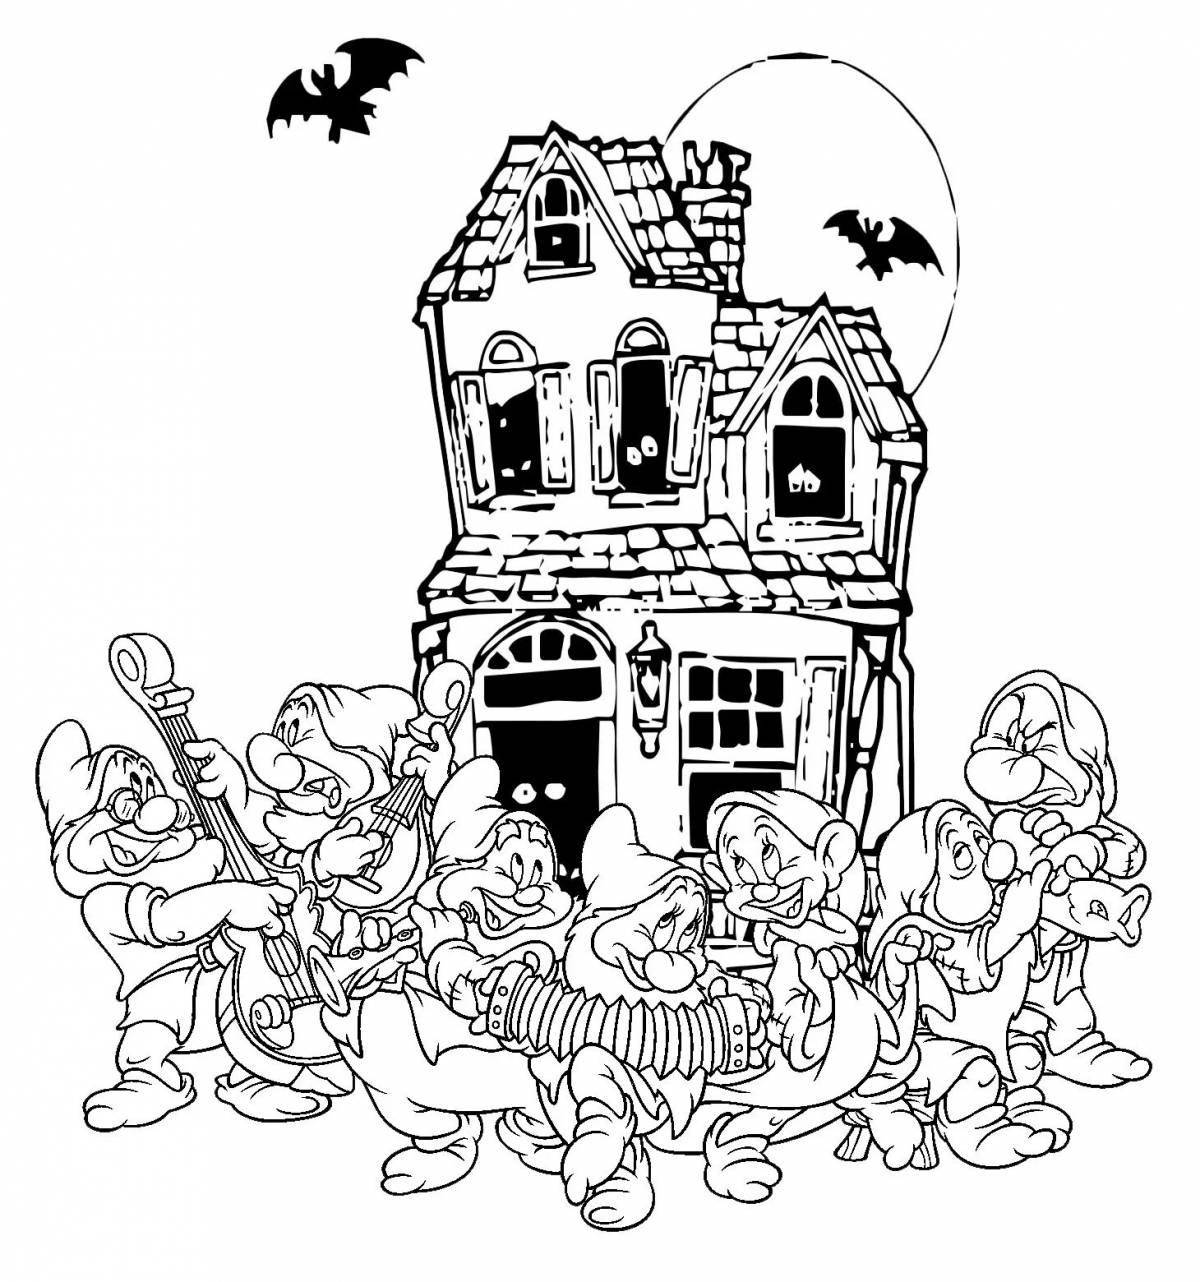 Chilling halloween coloring page